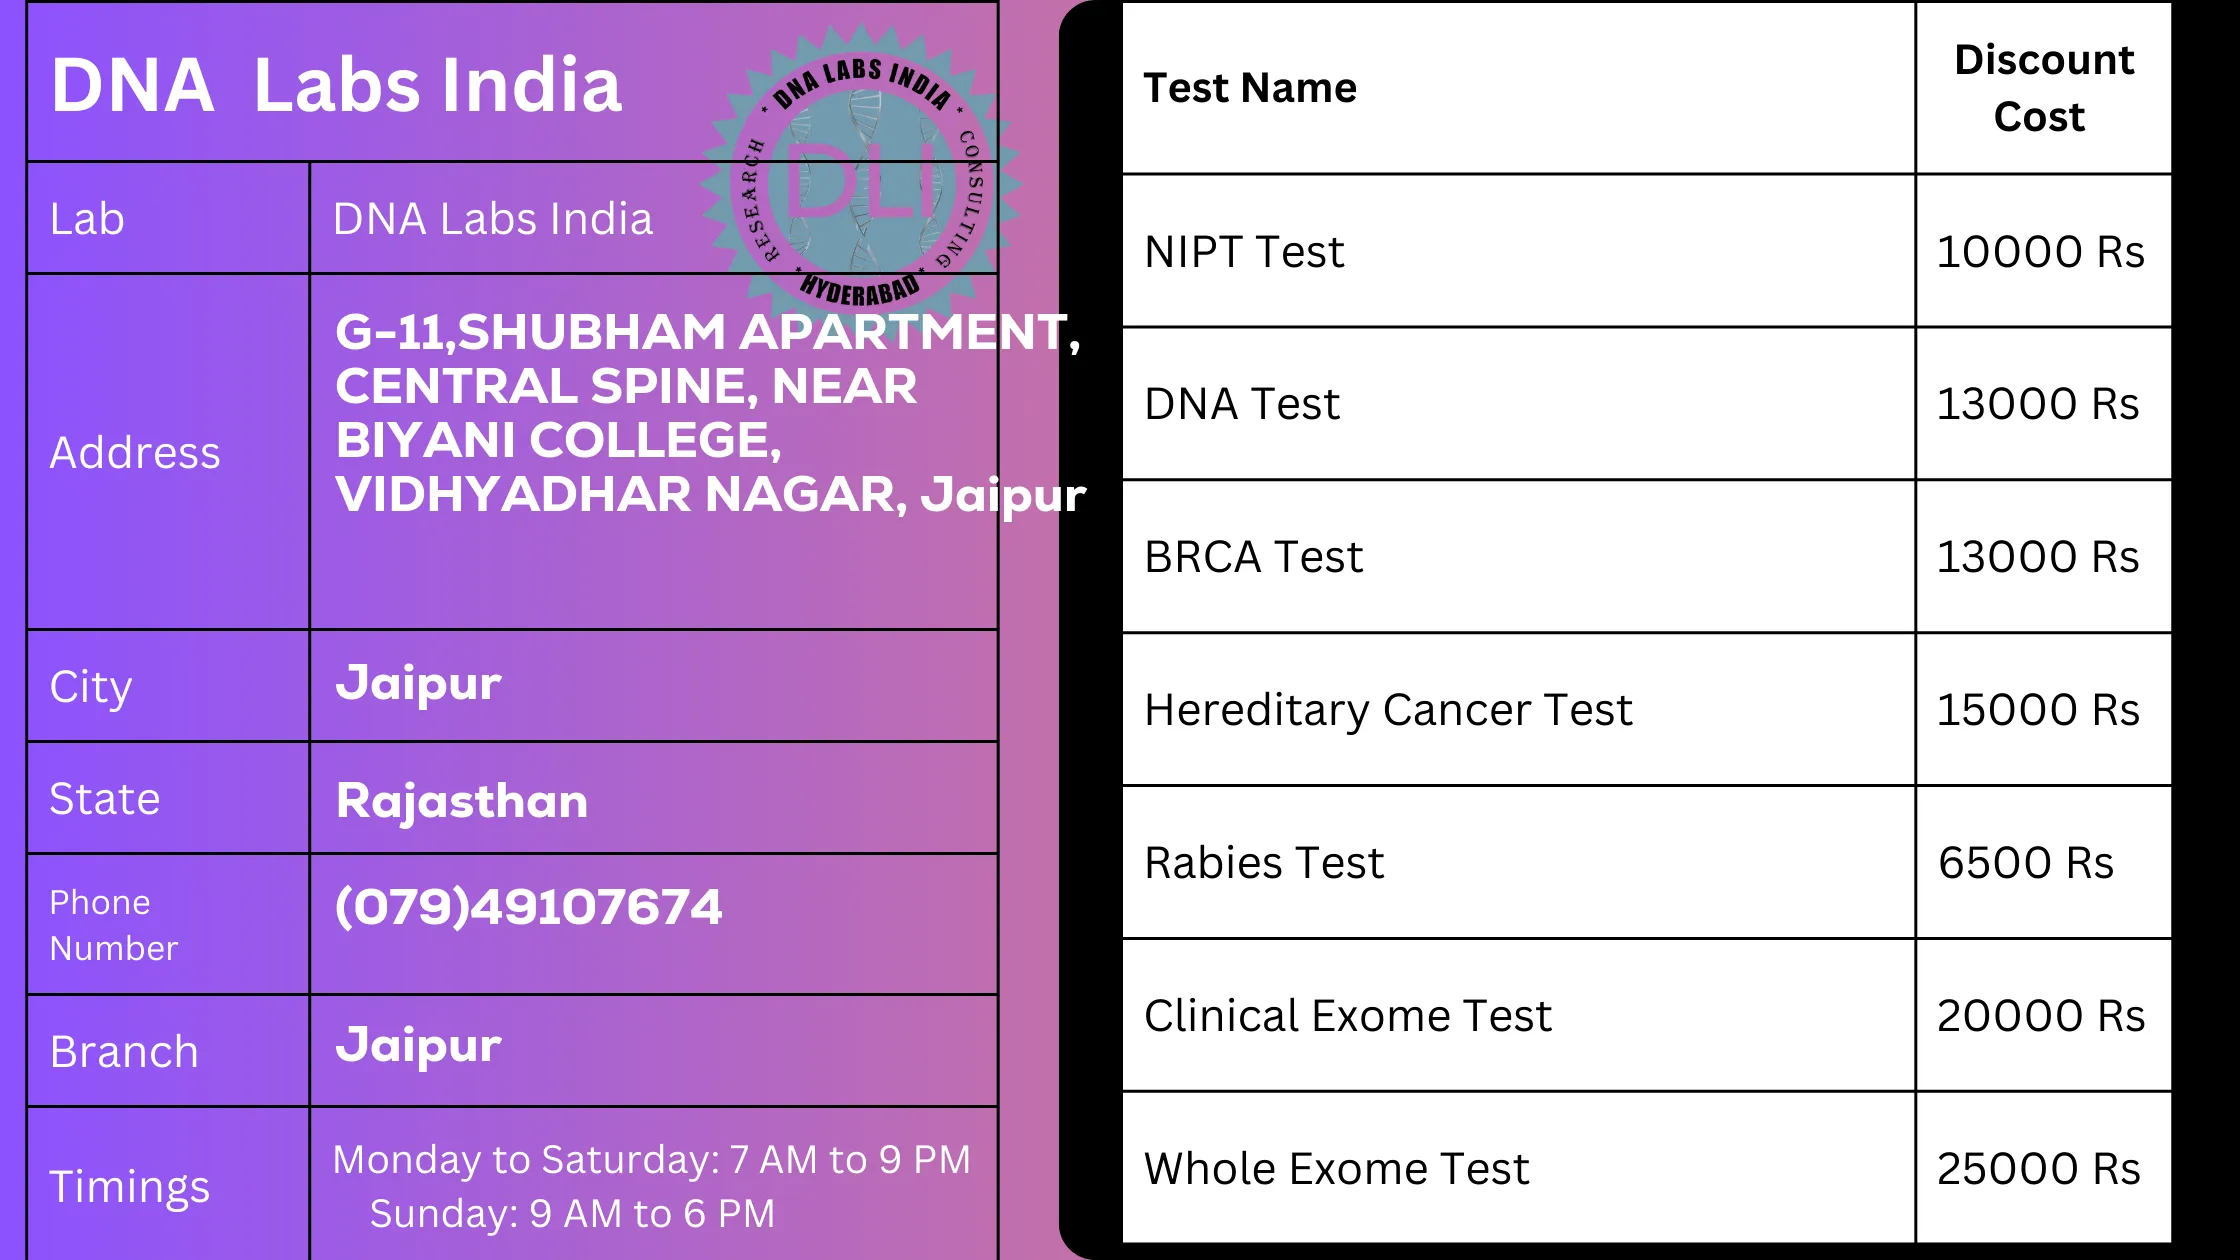 DNA Labs India: Your Trusted Genetic Testing Partner in Jaipurn